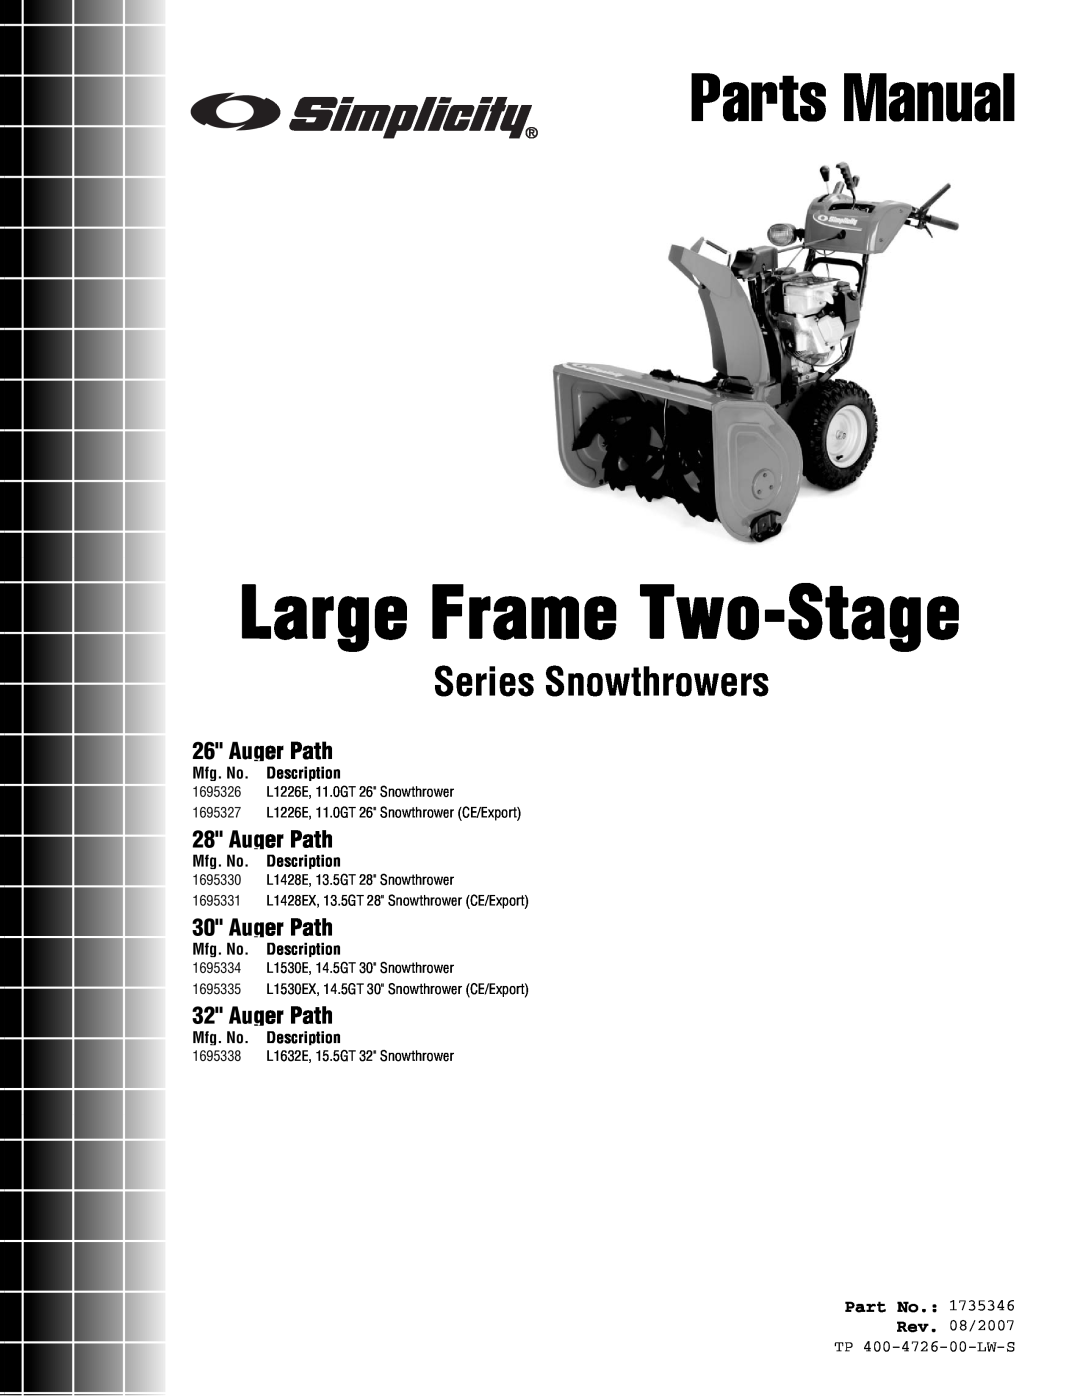 Simplicity 1696334 manual Auger Path, Mfg. No. Description, Large Frame Two-Stage, Parts Manual, Series Snowthrowers 